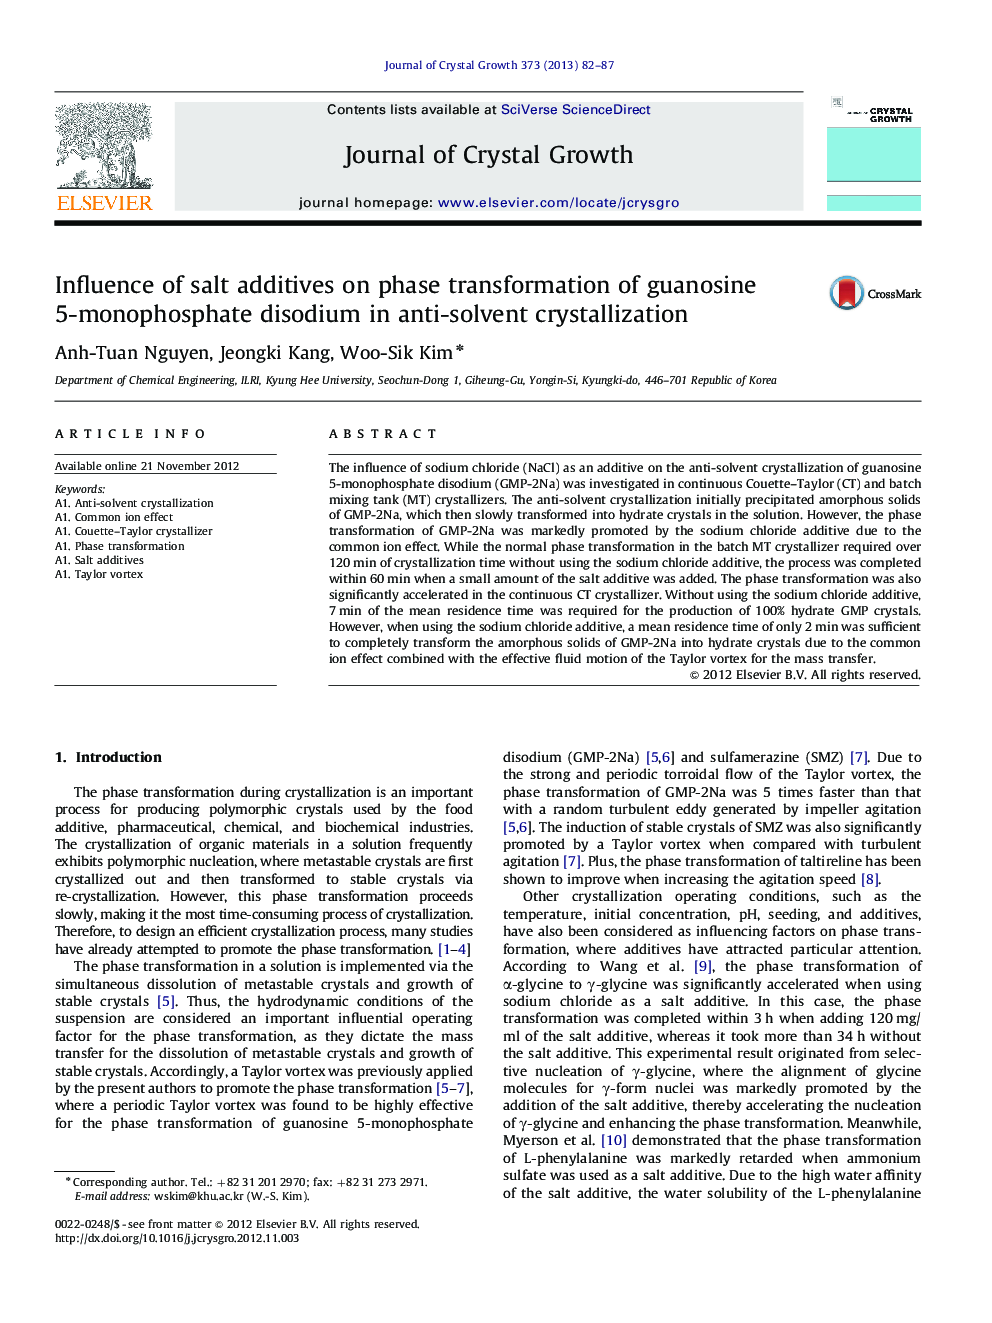 Influence of salt additives on phase transformation of guanosine 5-monophosphate disodium in anti-solvent crystallization